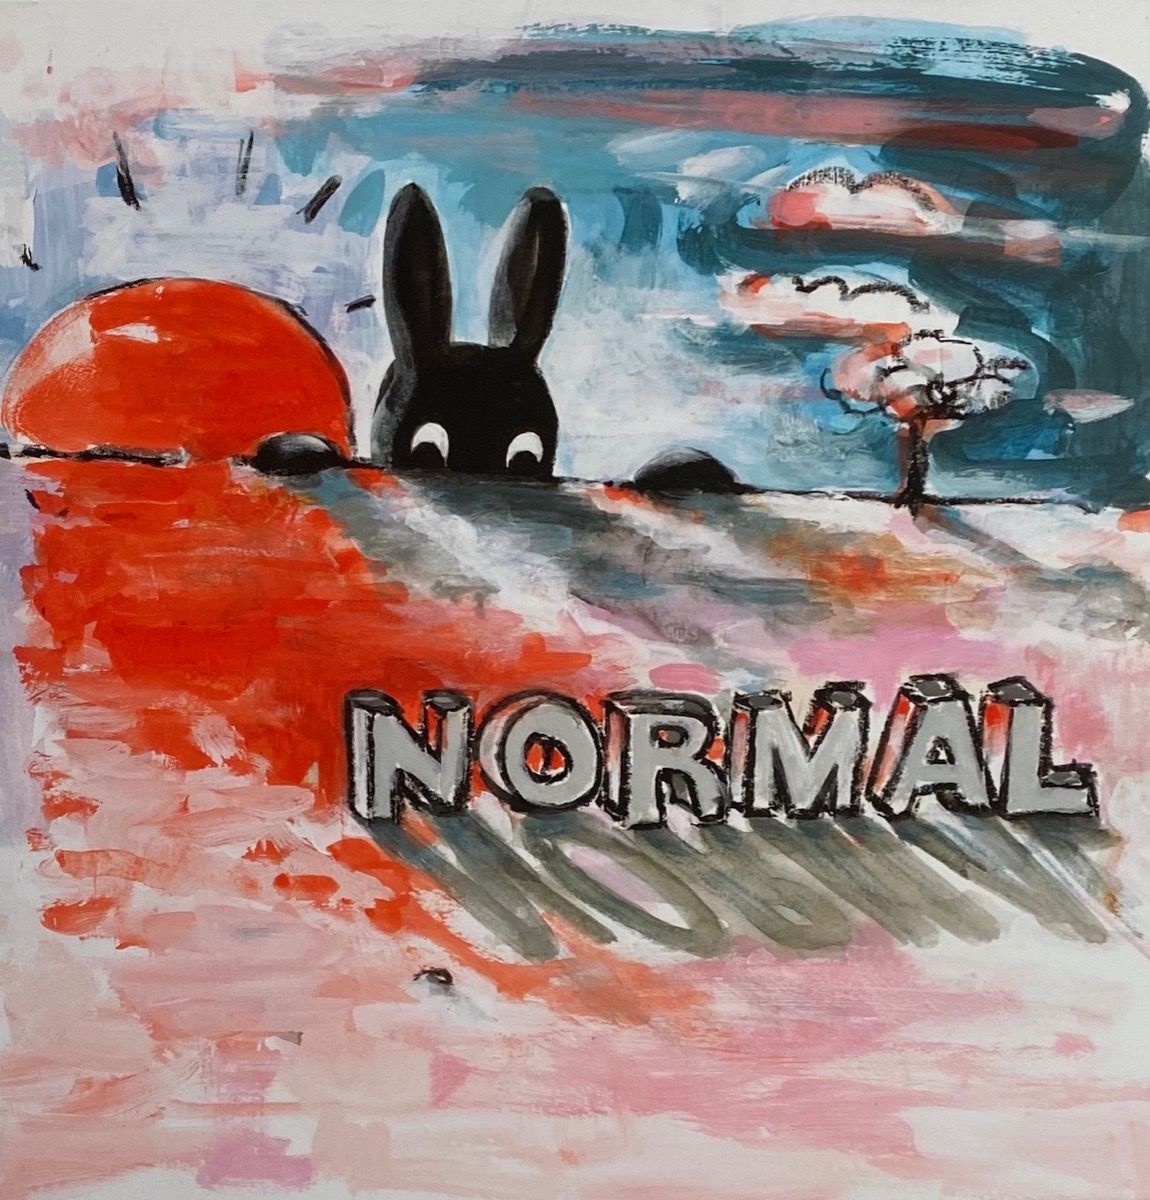 The New Normal by Harry Bunce